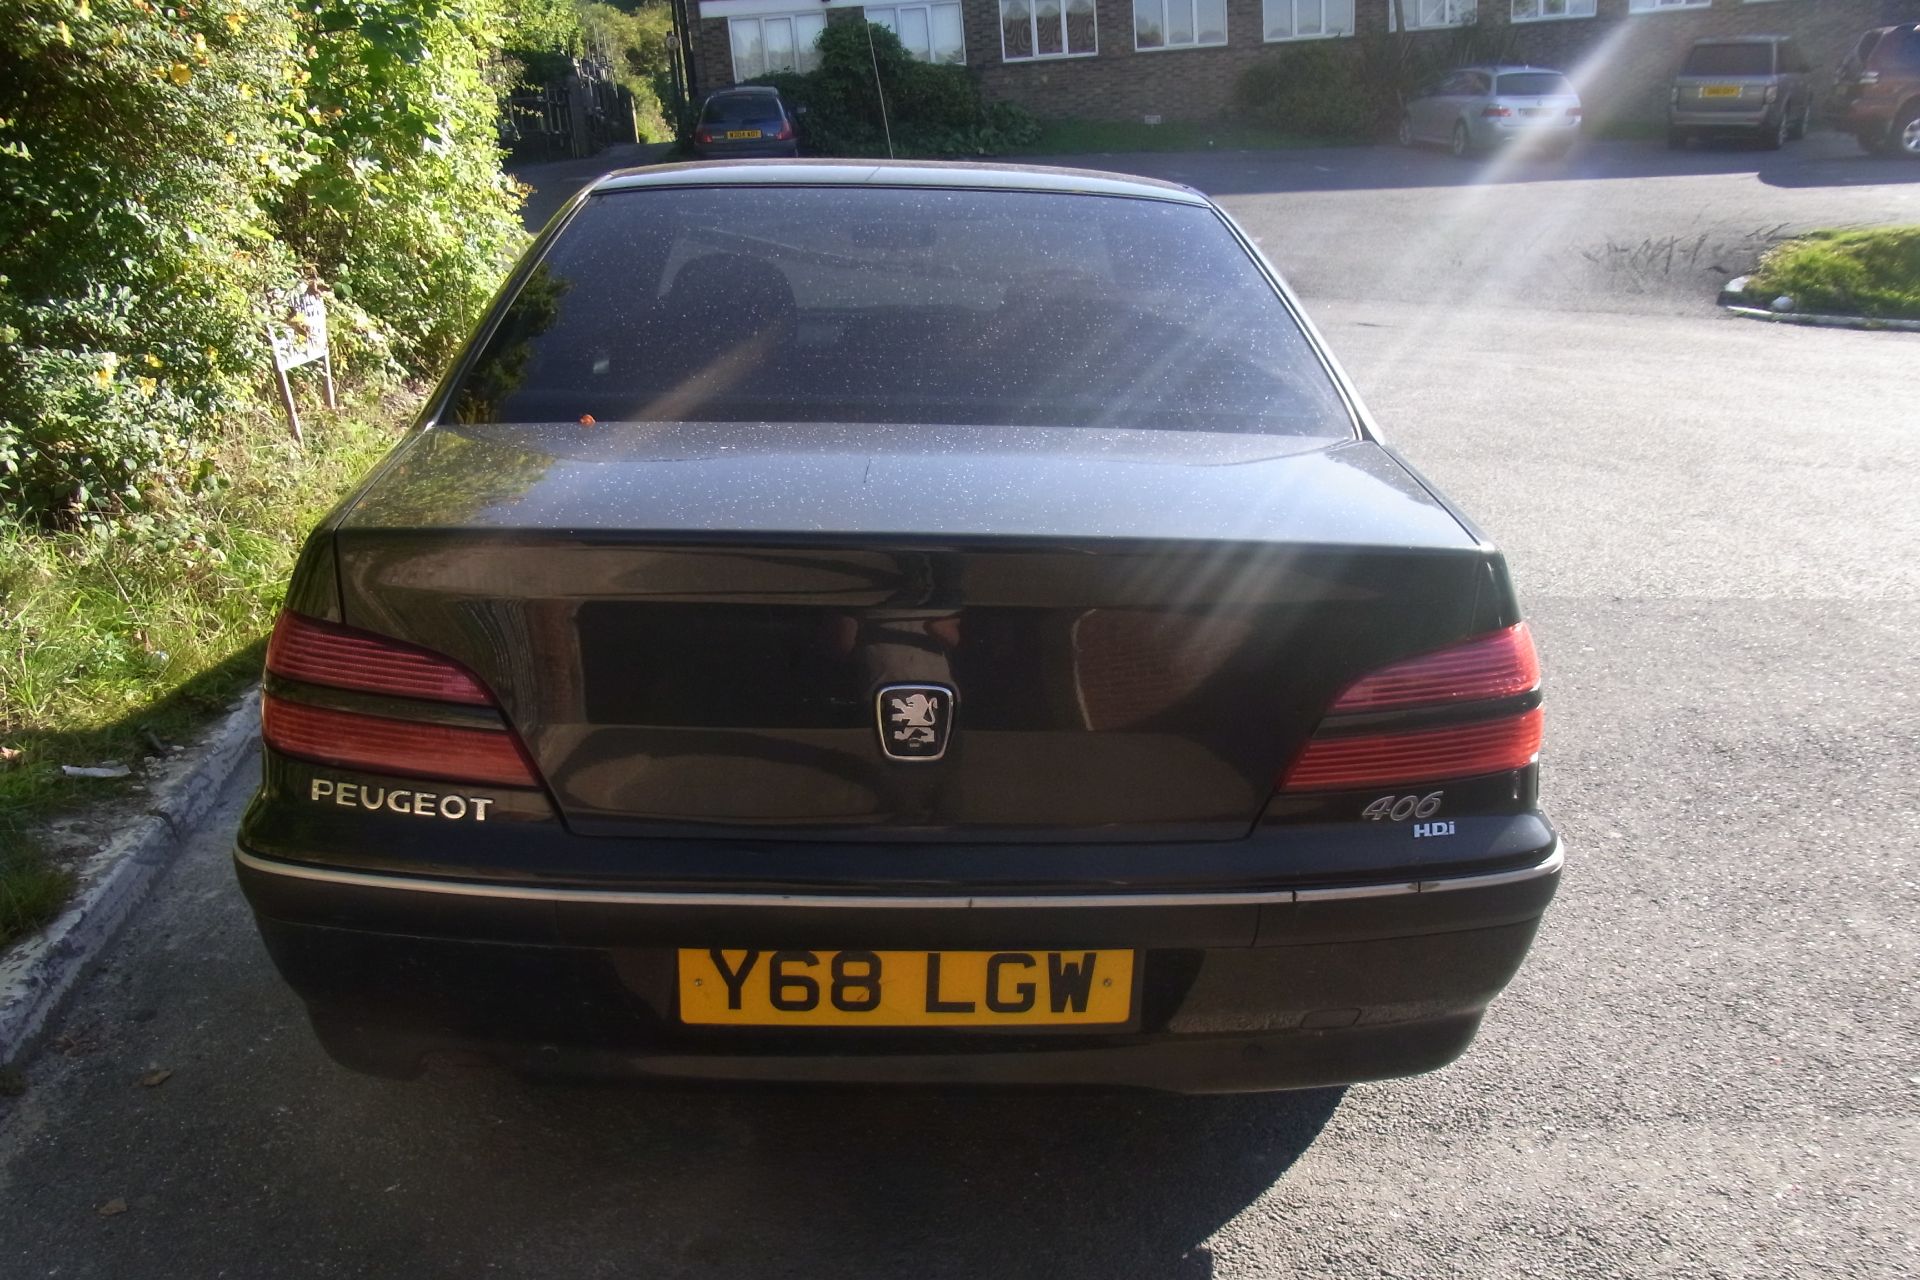 Y68 LGW - Peugeot 406 L HDI (90) with V5 - No Keys - Image 3 of 3